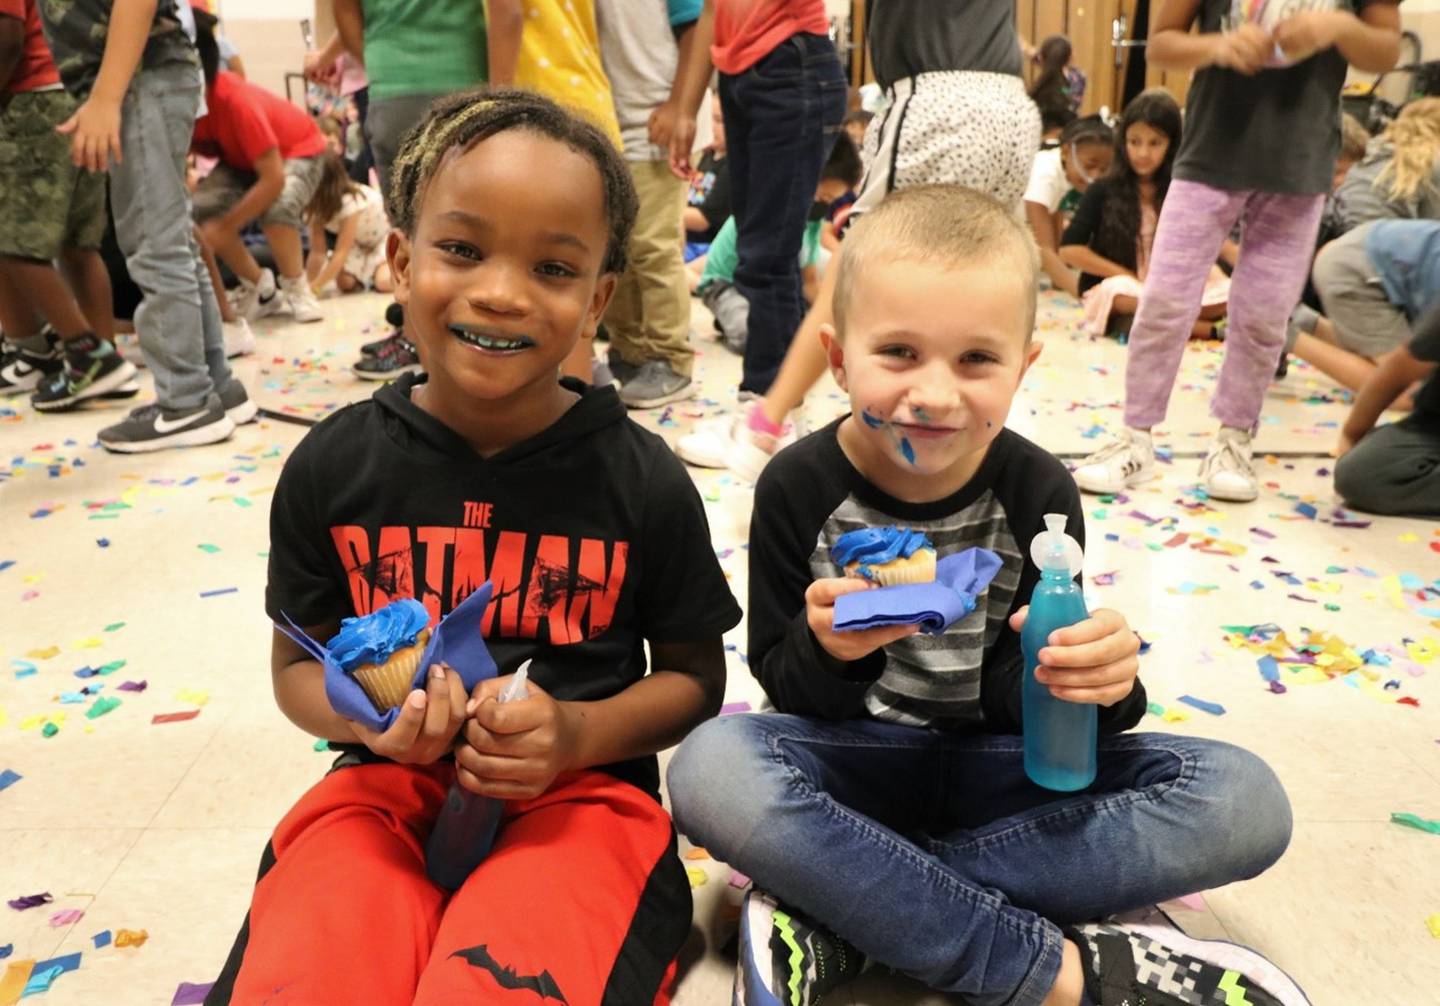 Eisenhower Academy was named a 2022 National Blue Ribbon School on Friday, Sept. 16, 2022. Students and staff celebrated their achievements that same day with music, blue cupcakes, blue juice and confetti. Pictured are, from left, Eisenhower students Jayce Samuel and Cole Rogers.